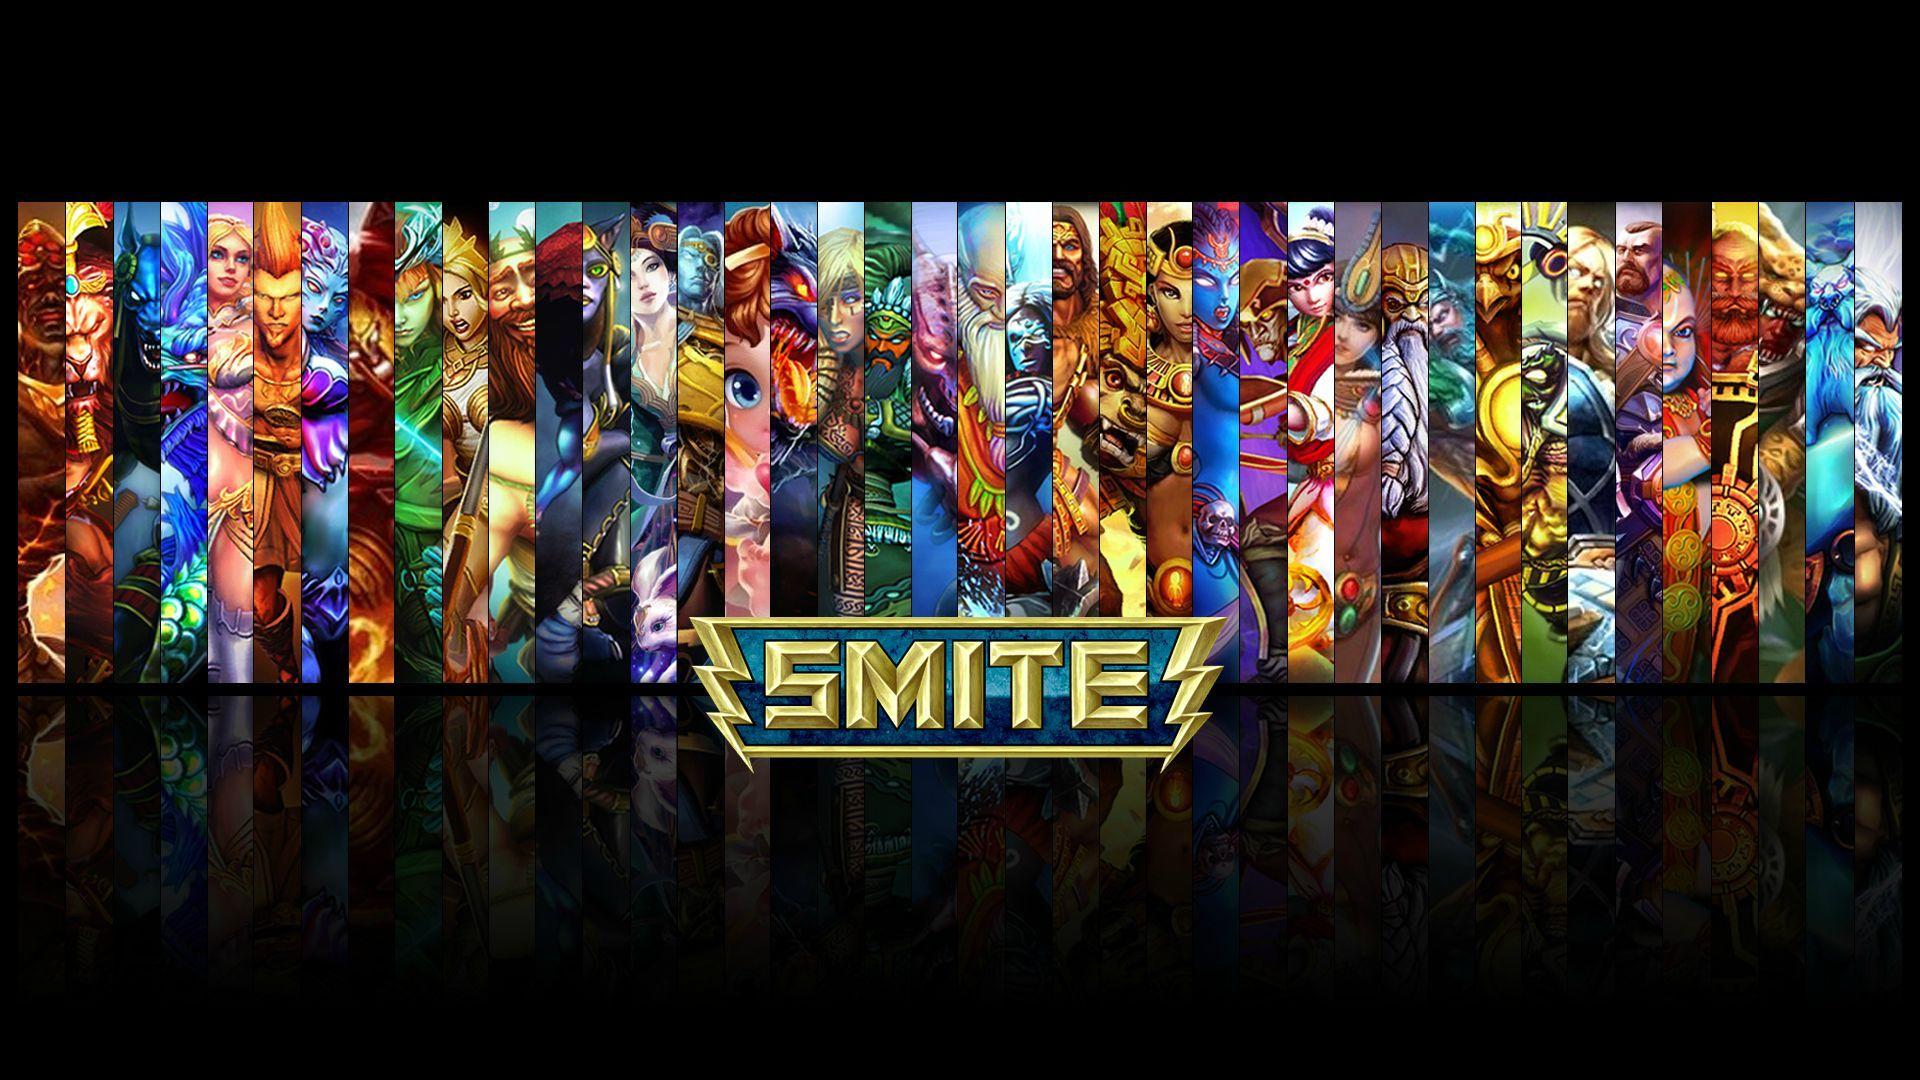 New Smite Wallpaper with ALL GODS